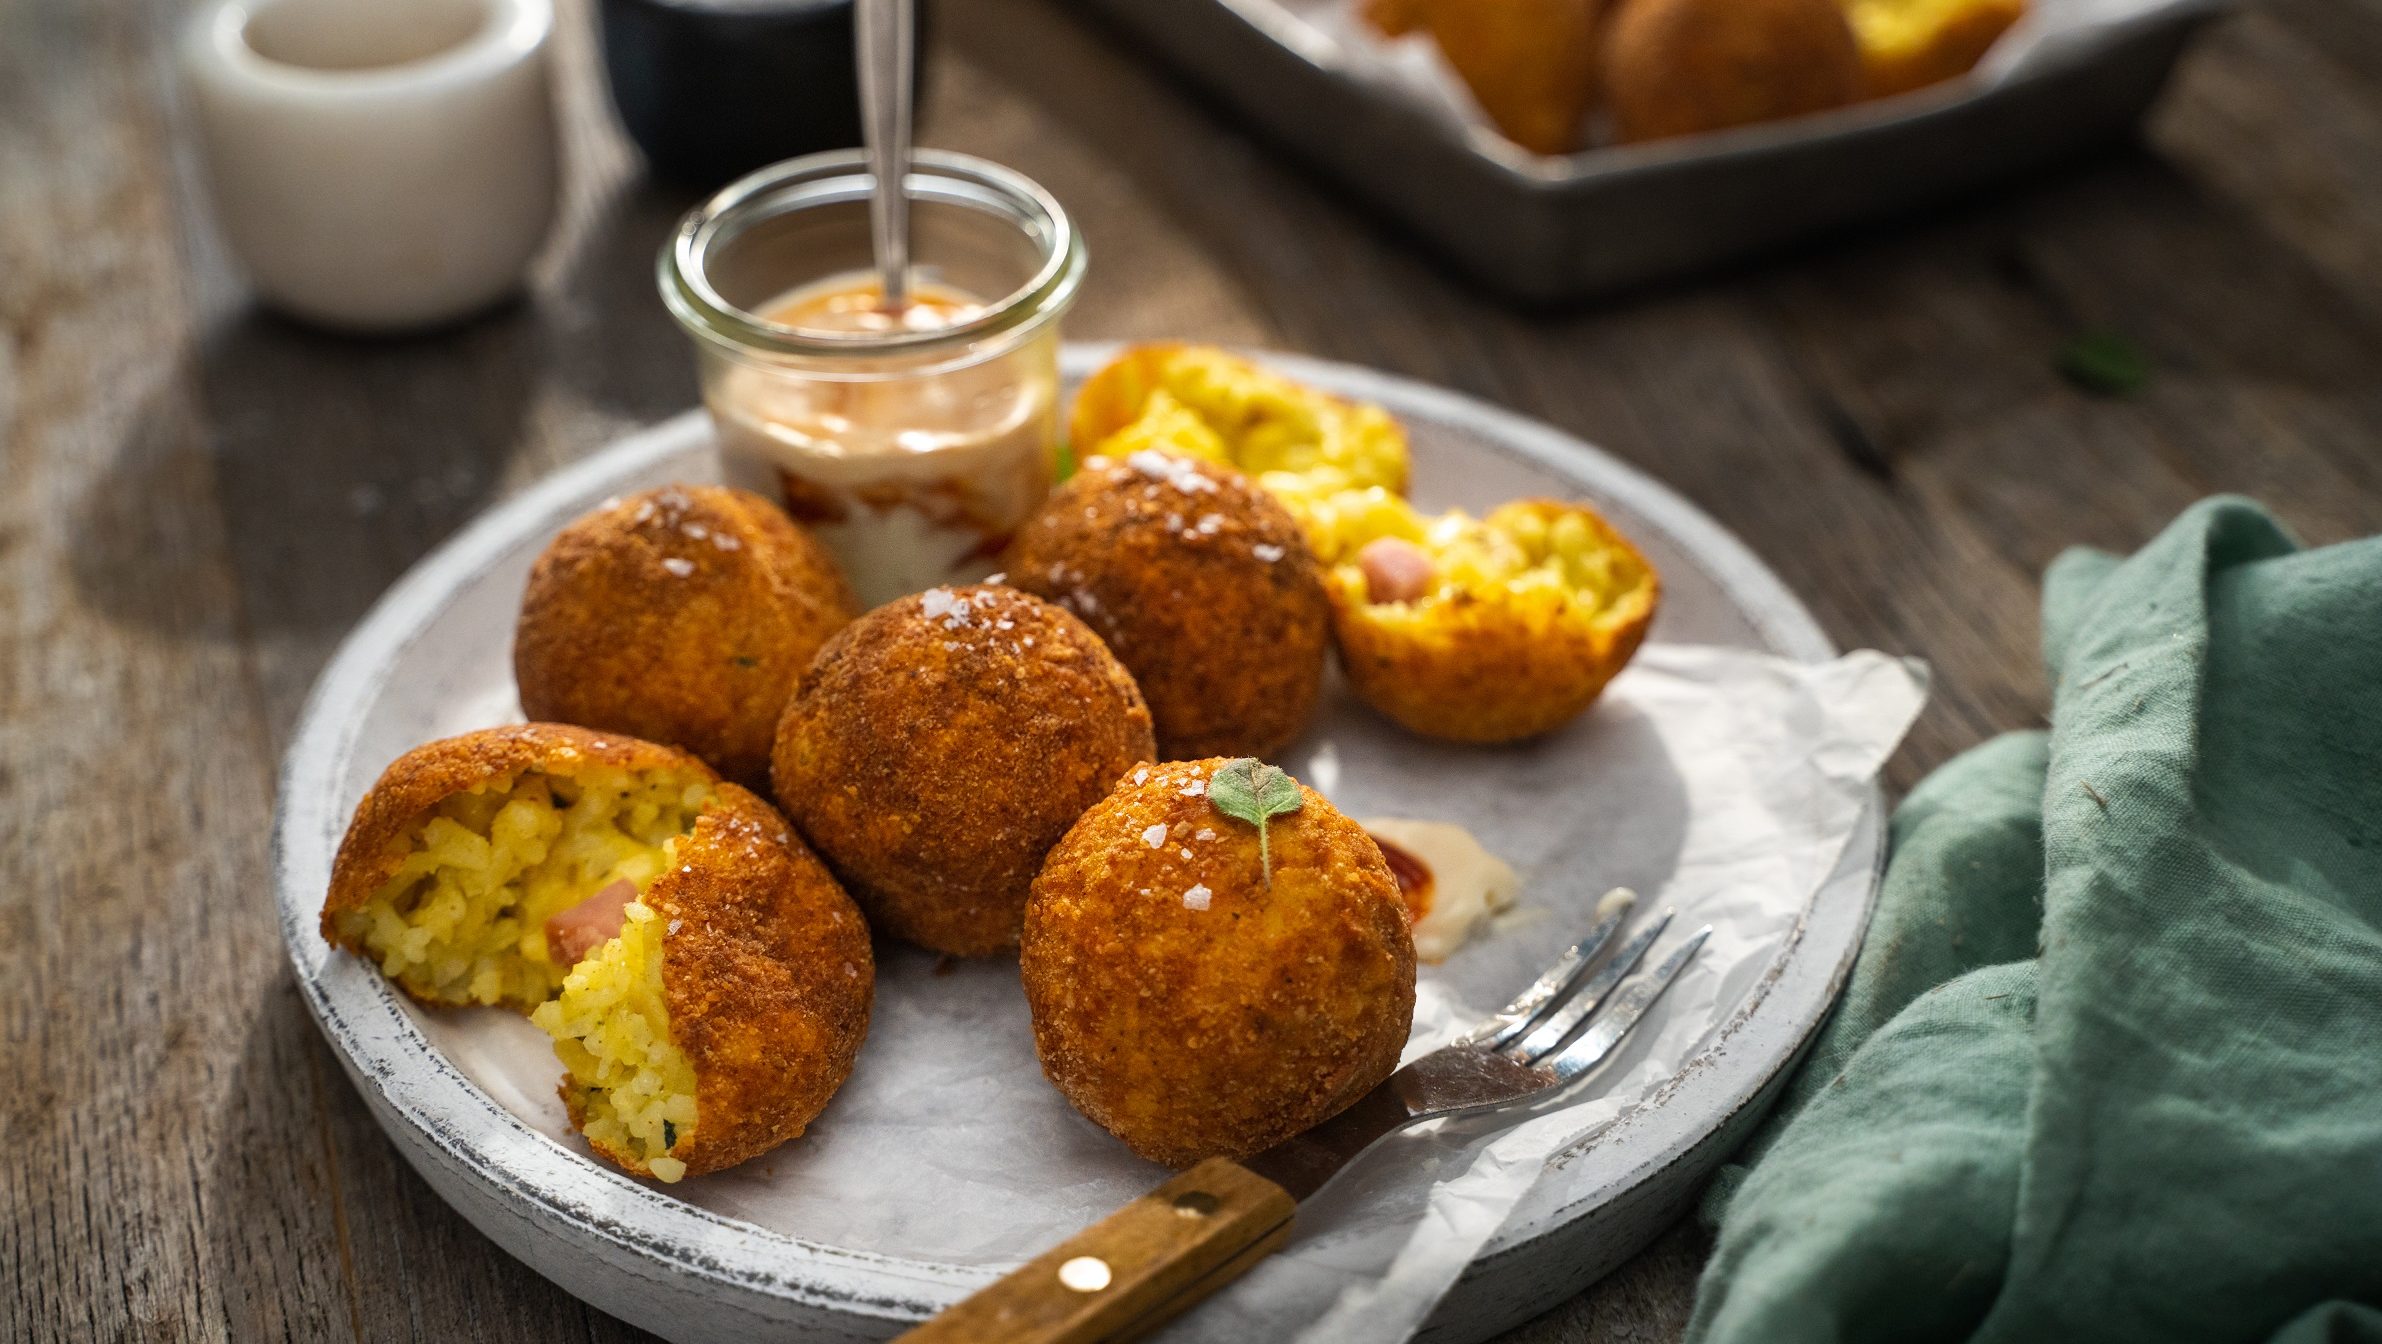 Five ham and cheese arancini balls on a white plate with a fork and a pot of sauce on a wooden table.